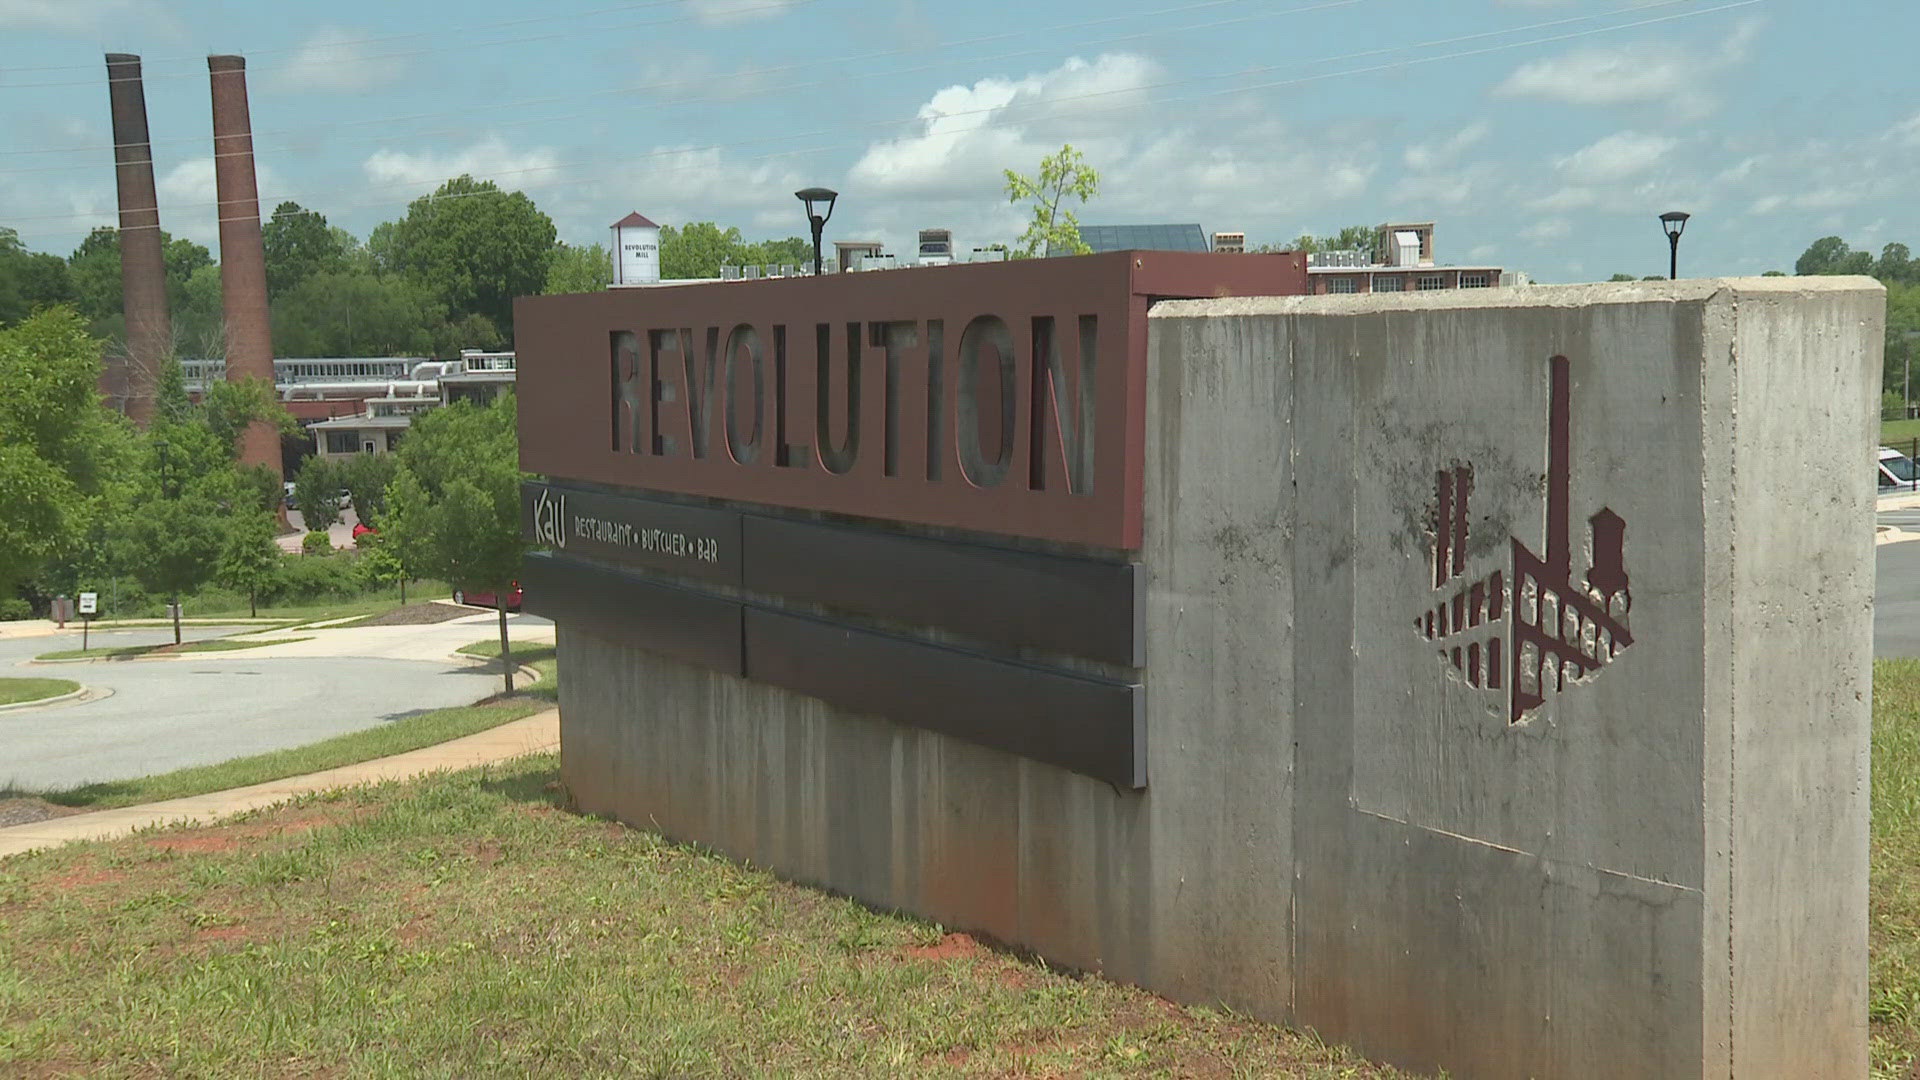 The company is opening a bar in Revolution Mill.